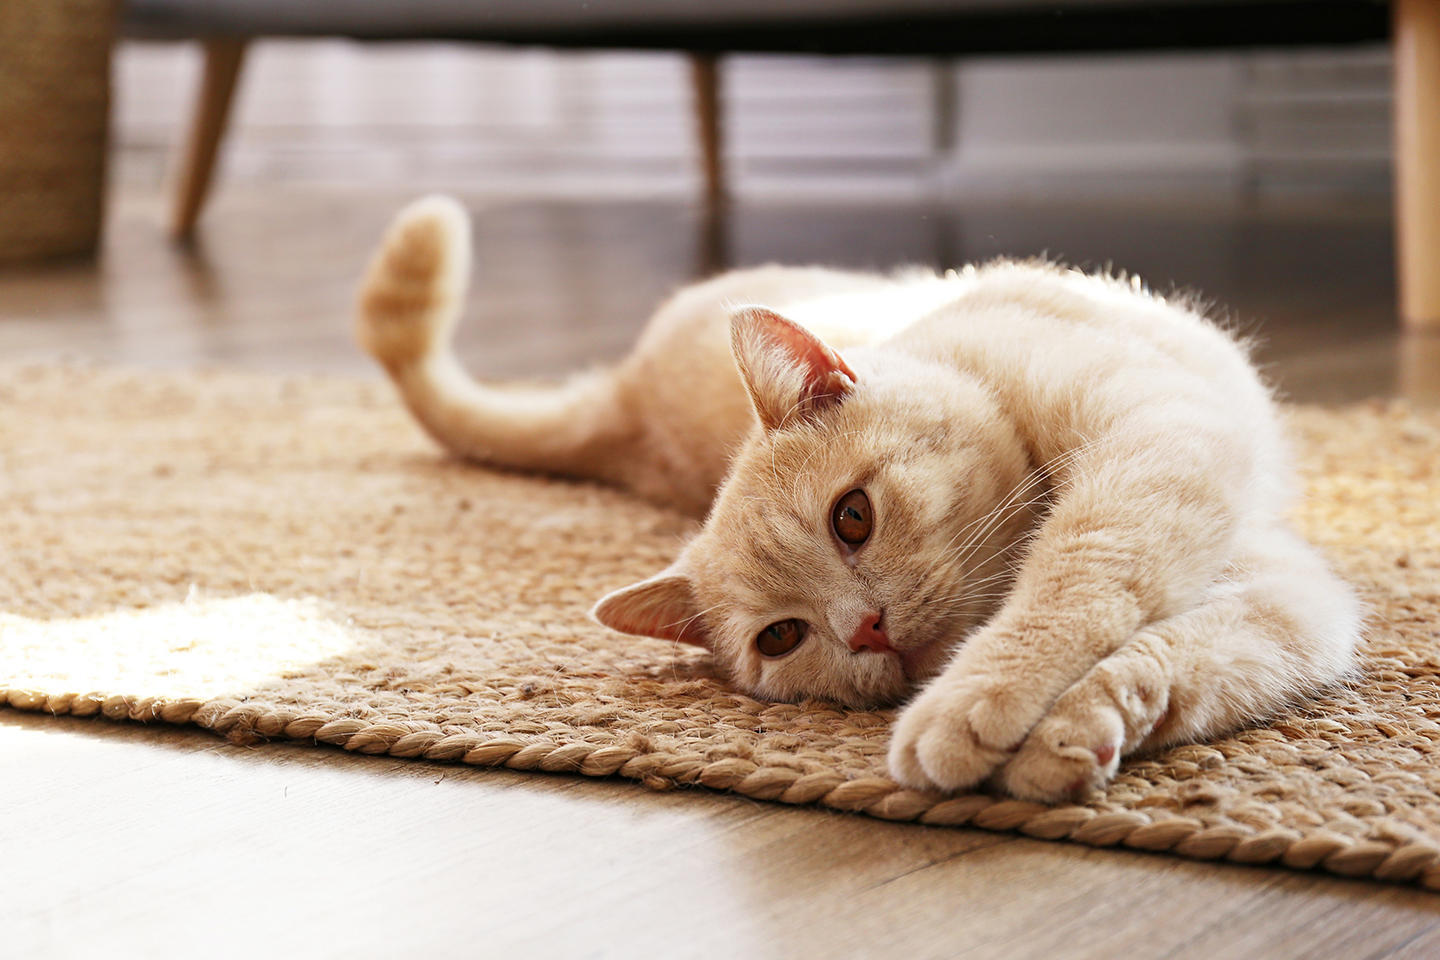 Cat stretching on rug.